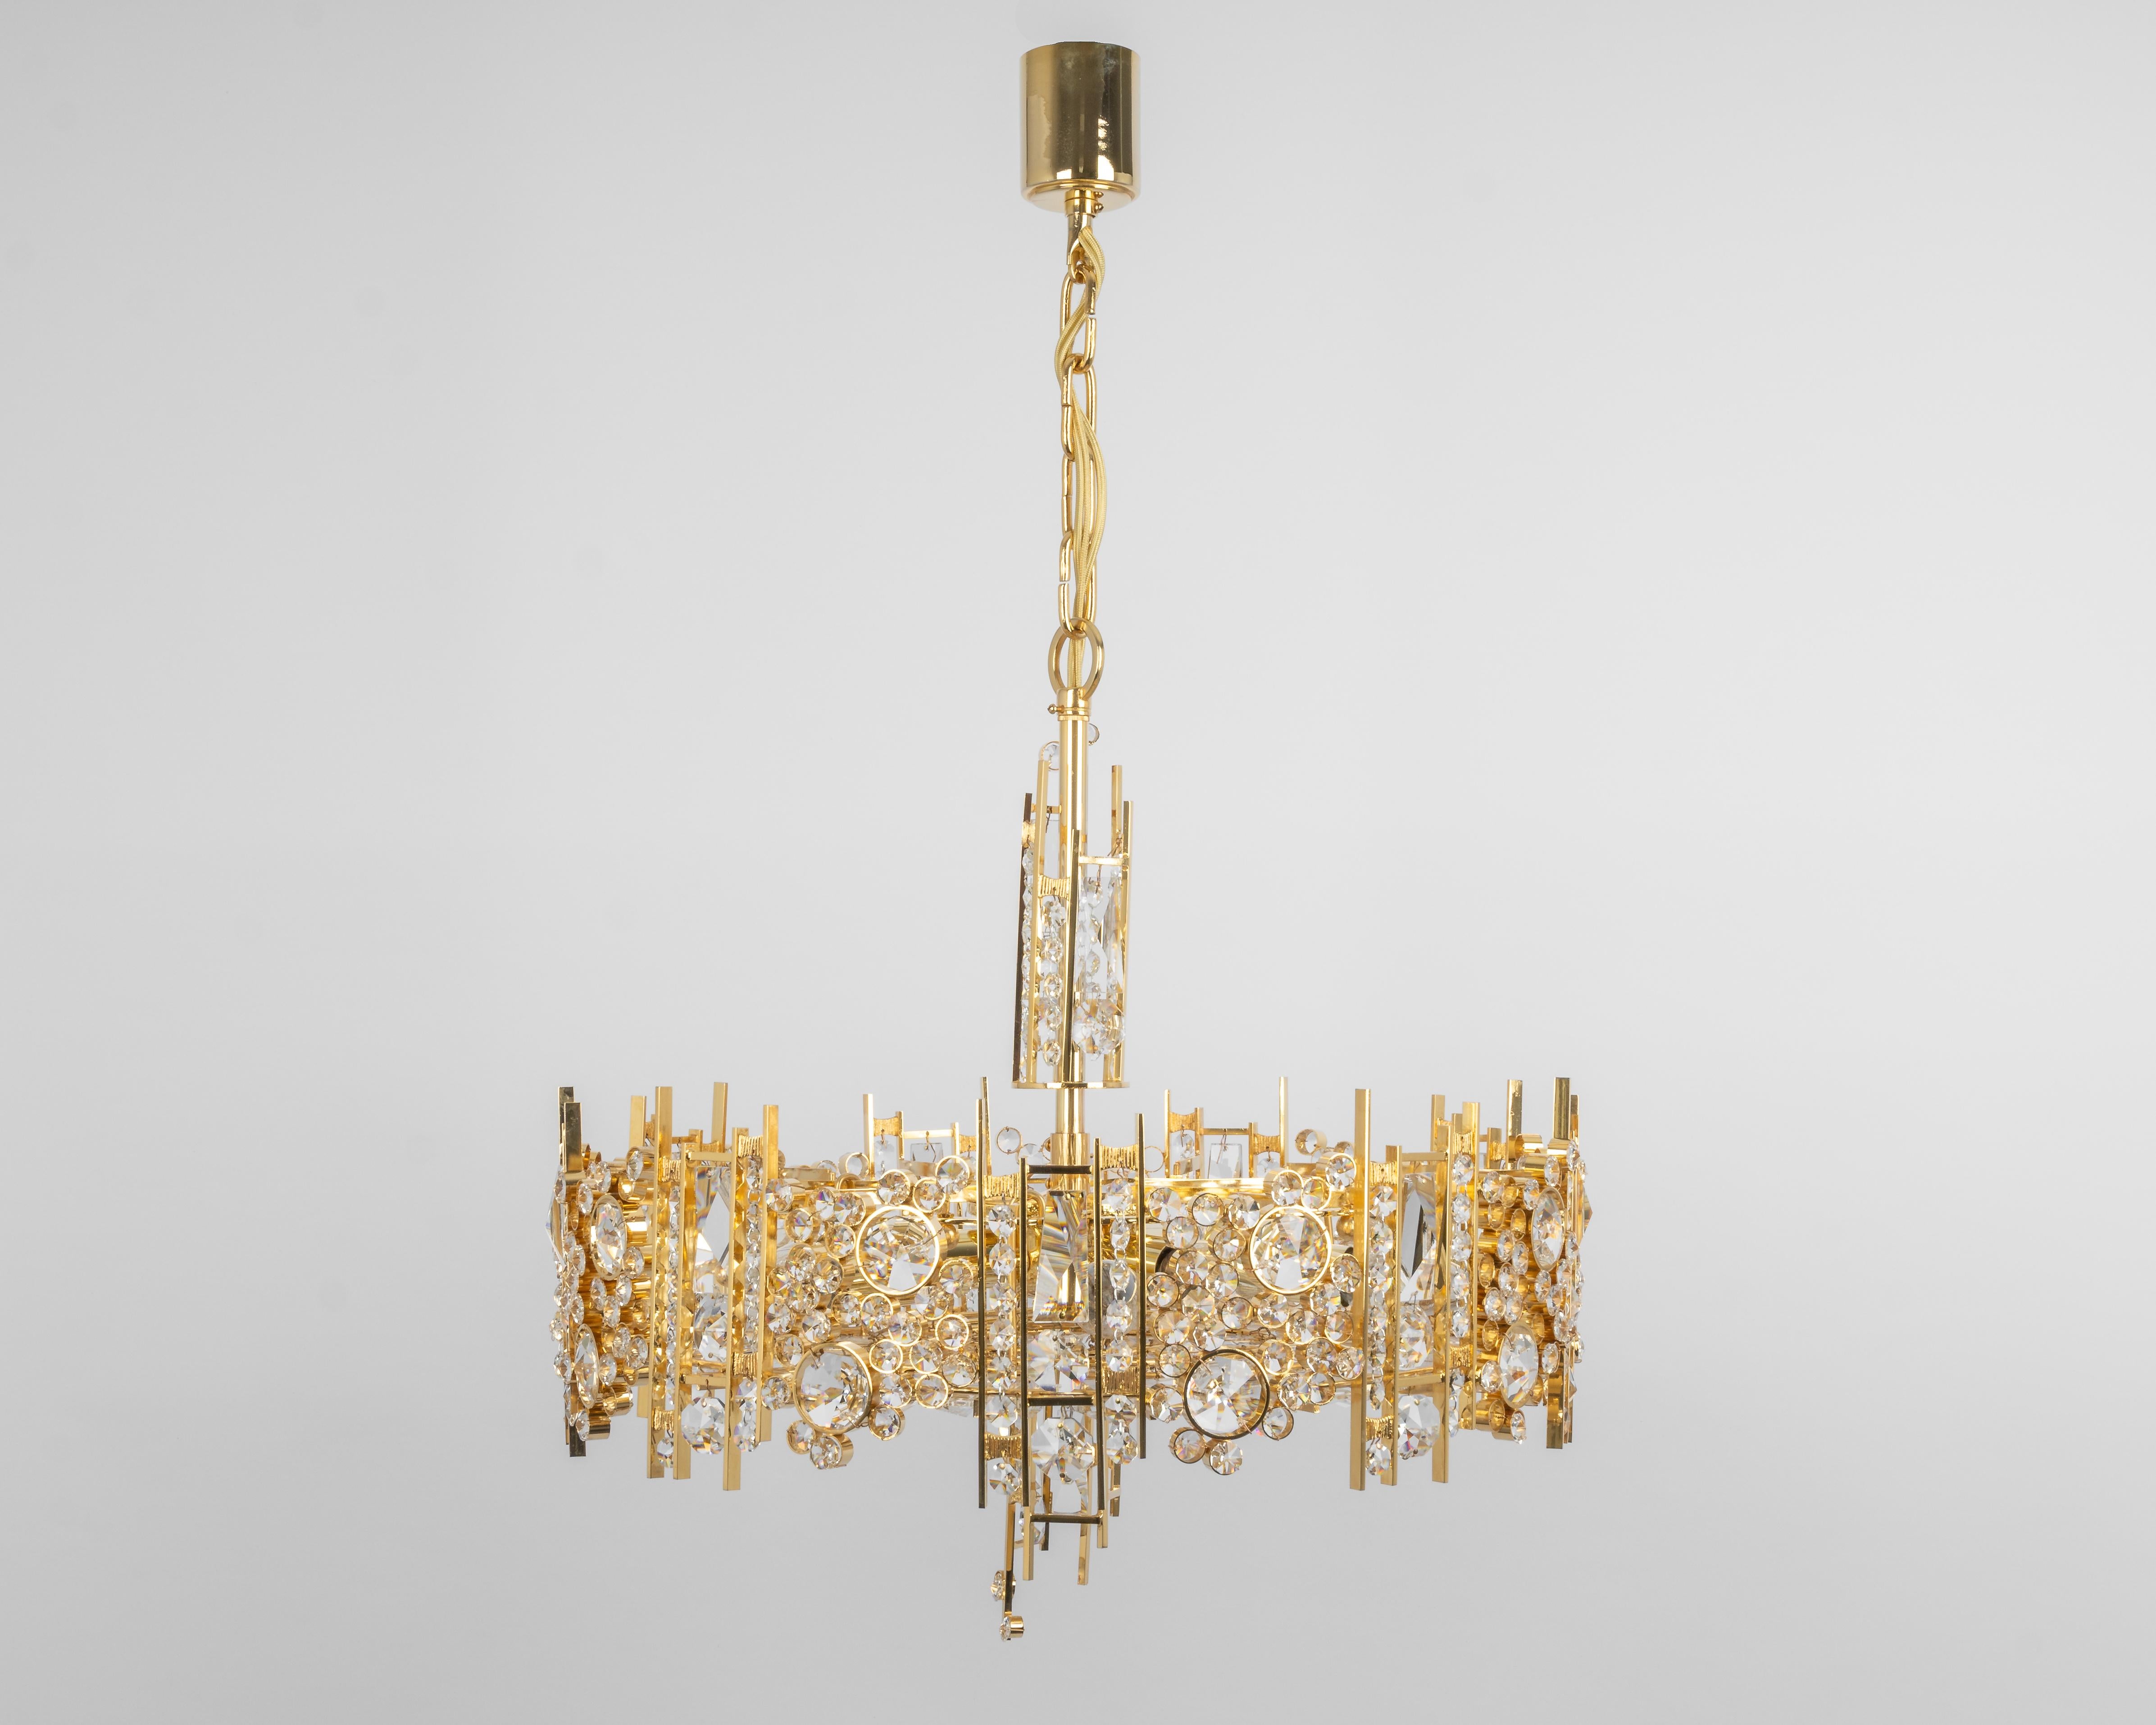 A wonderful and high-quality gilded chandelier by Palwa, Germany, 1970s.
It is made of a 24-carat gold-plated brass frame decorated with individual 